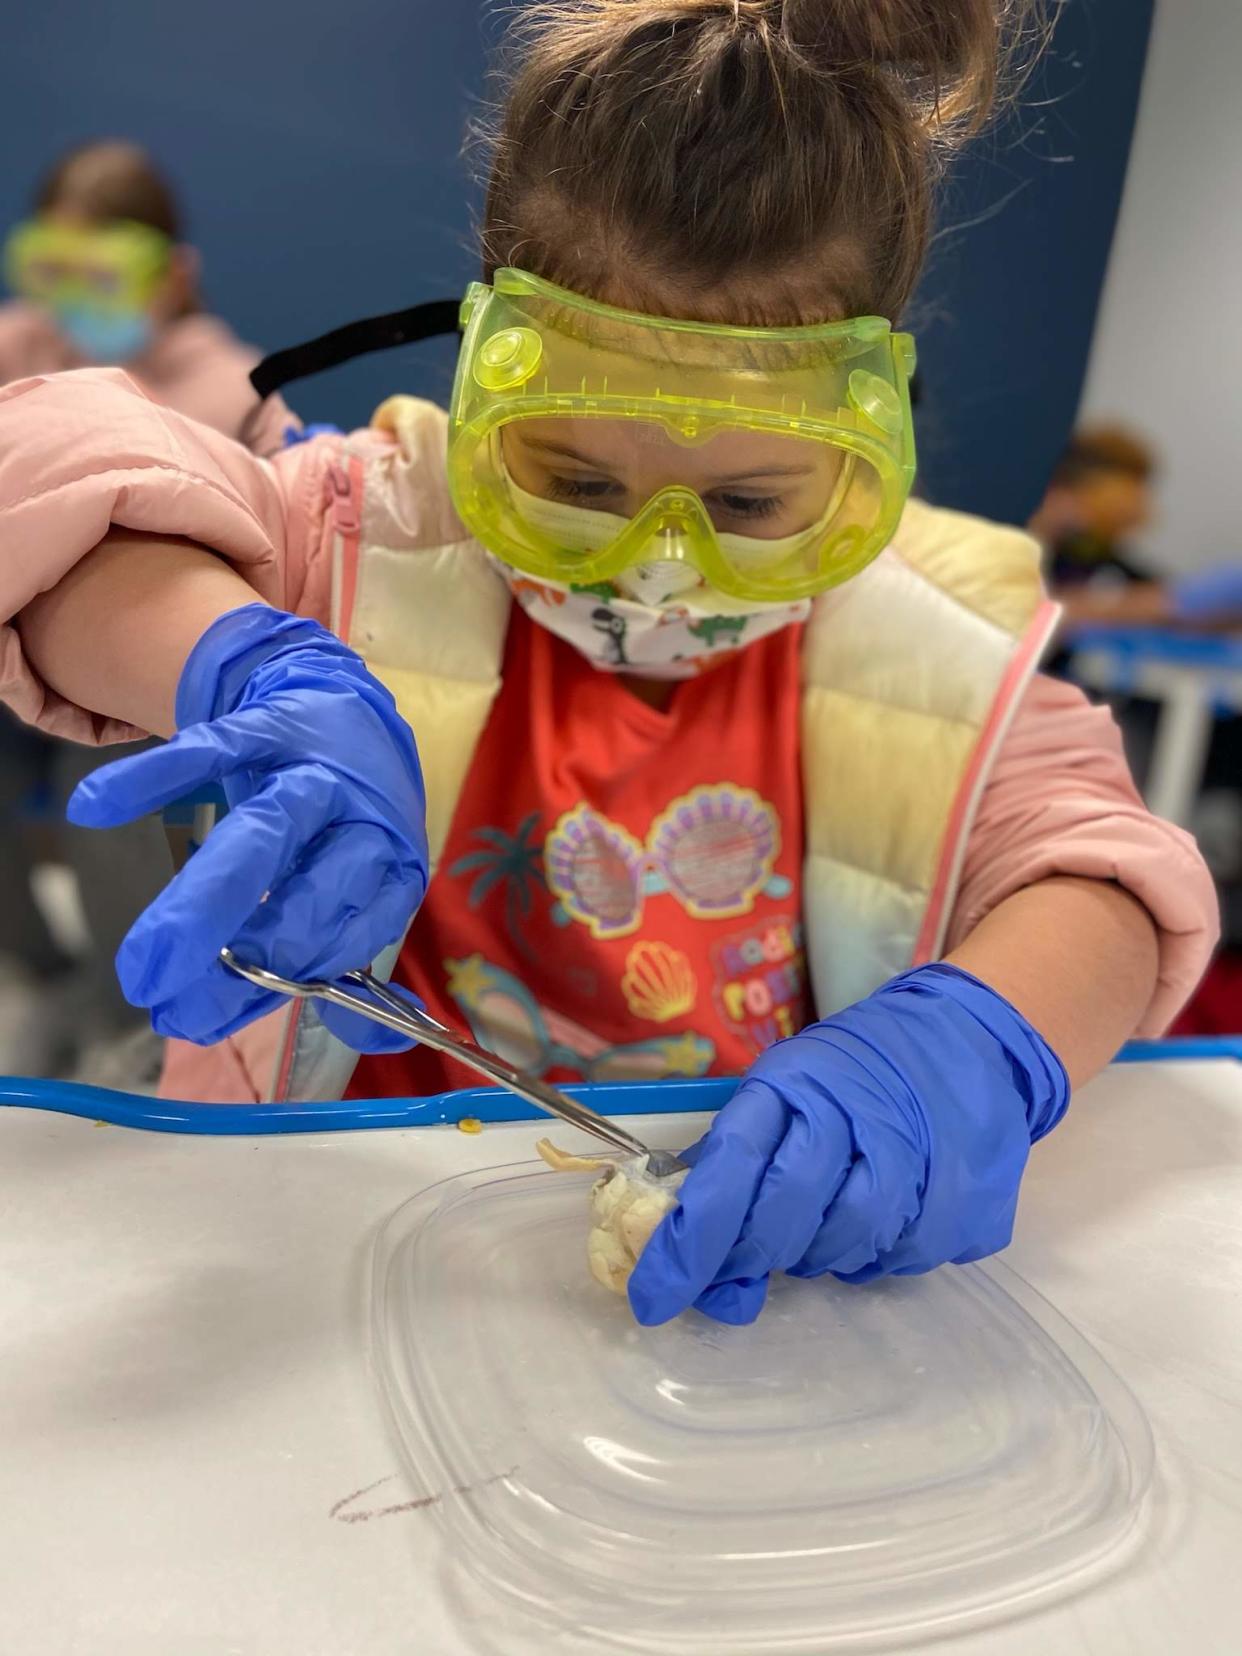 Kids like Paisley Dunbar got hands-on experience in STEM education in Discovery School at the Center this past year. The Discovery Center is providing a variety of educational programs during the COVID-19 pandemic.